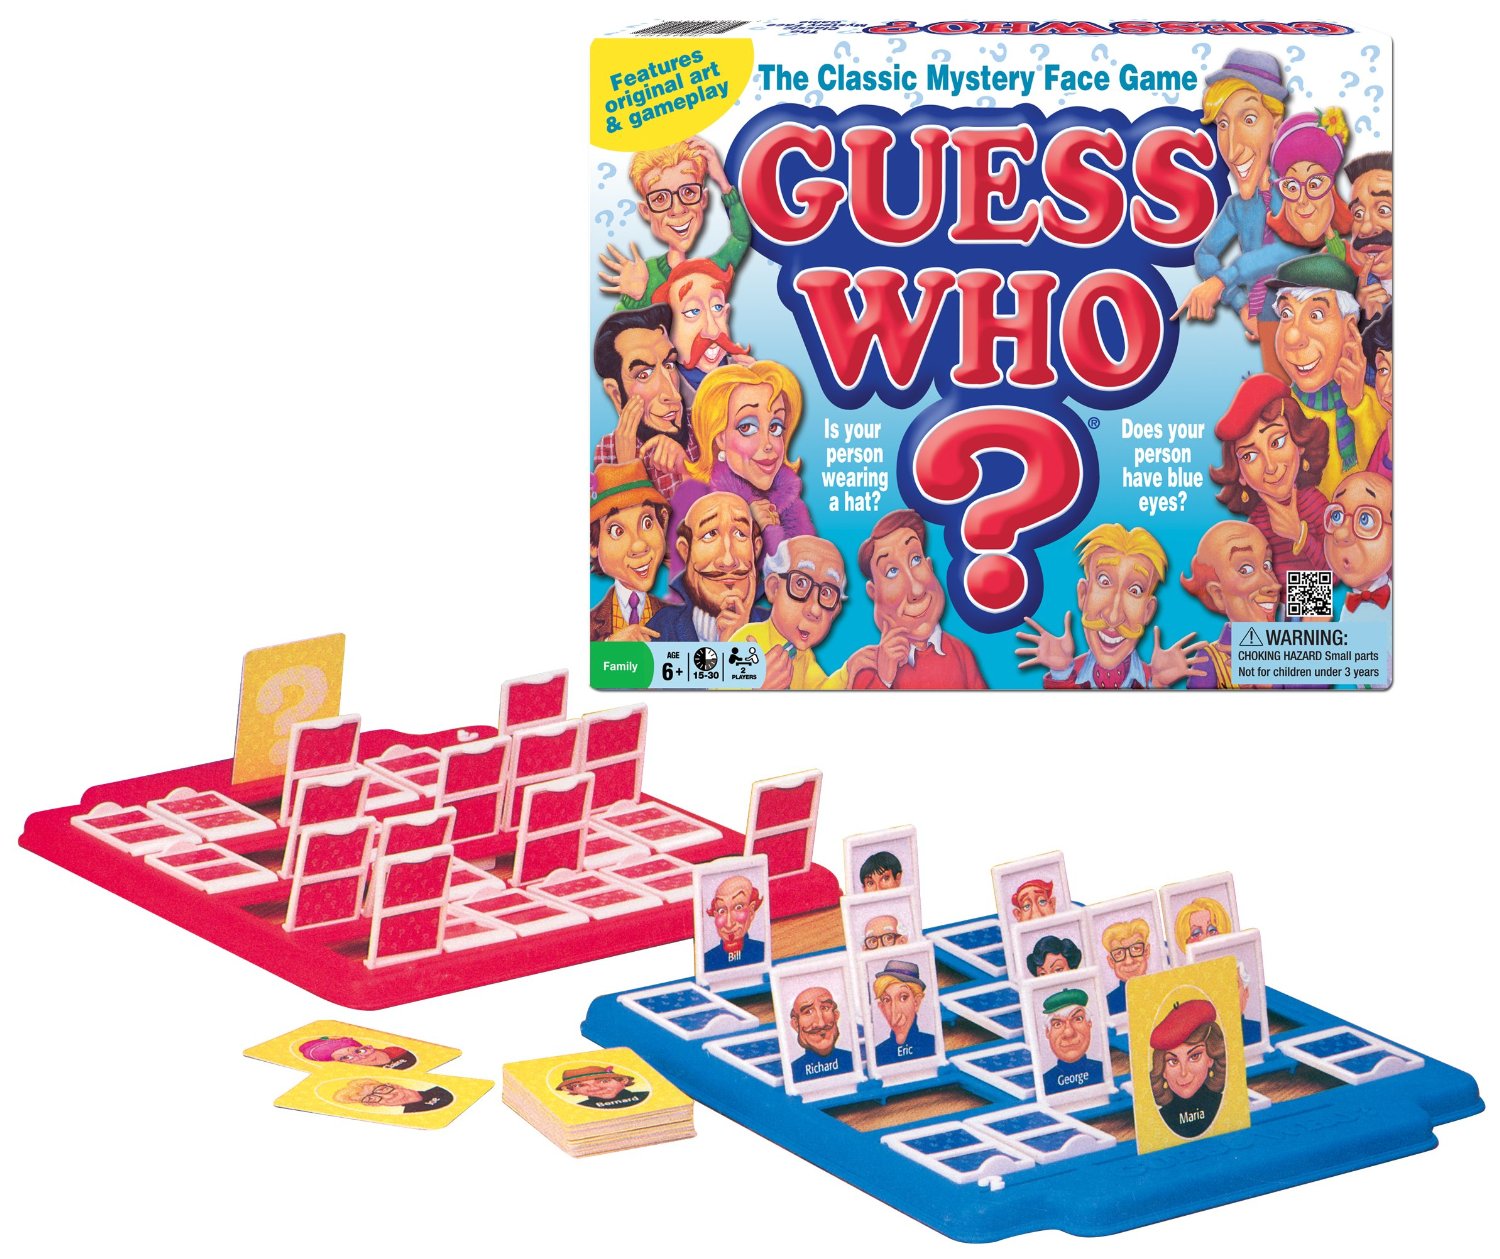 The Two Player Game of Guess Who?